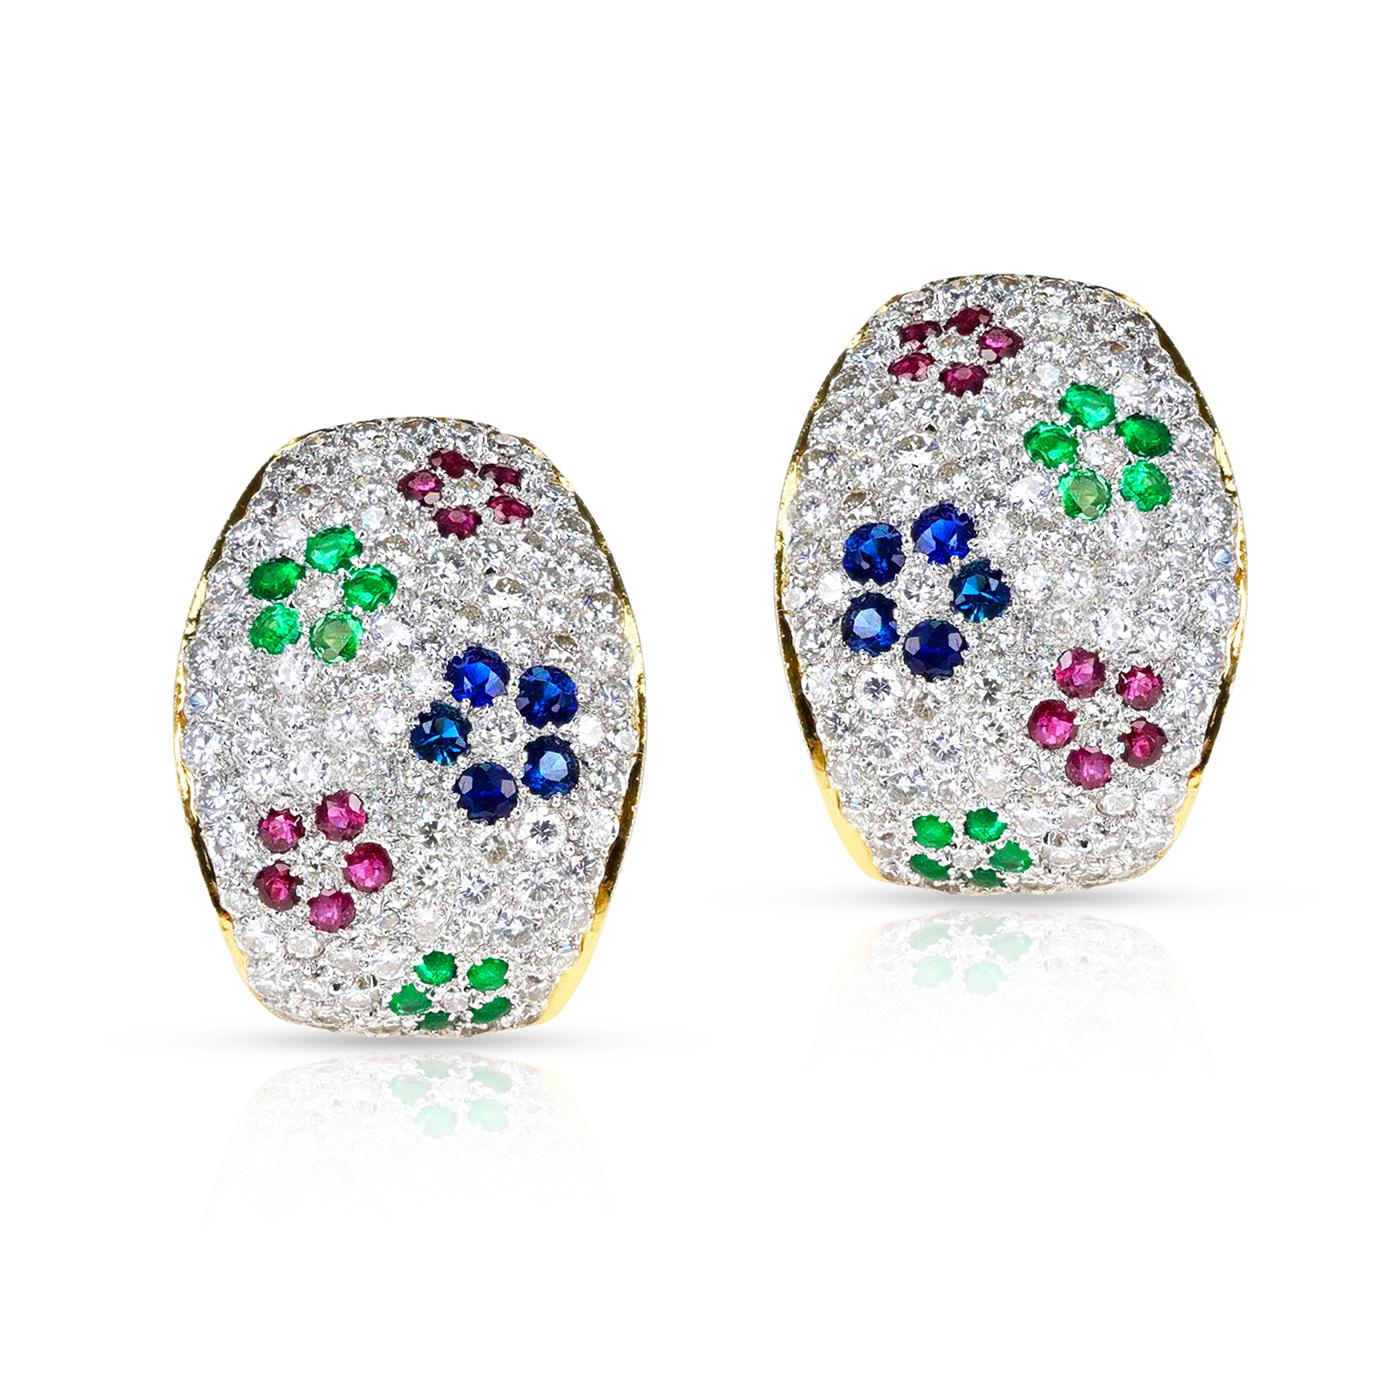 Round Cut Diamond, Emerald, Ruby and Sapphire Floral Design Earrings, 18k